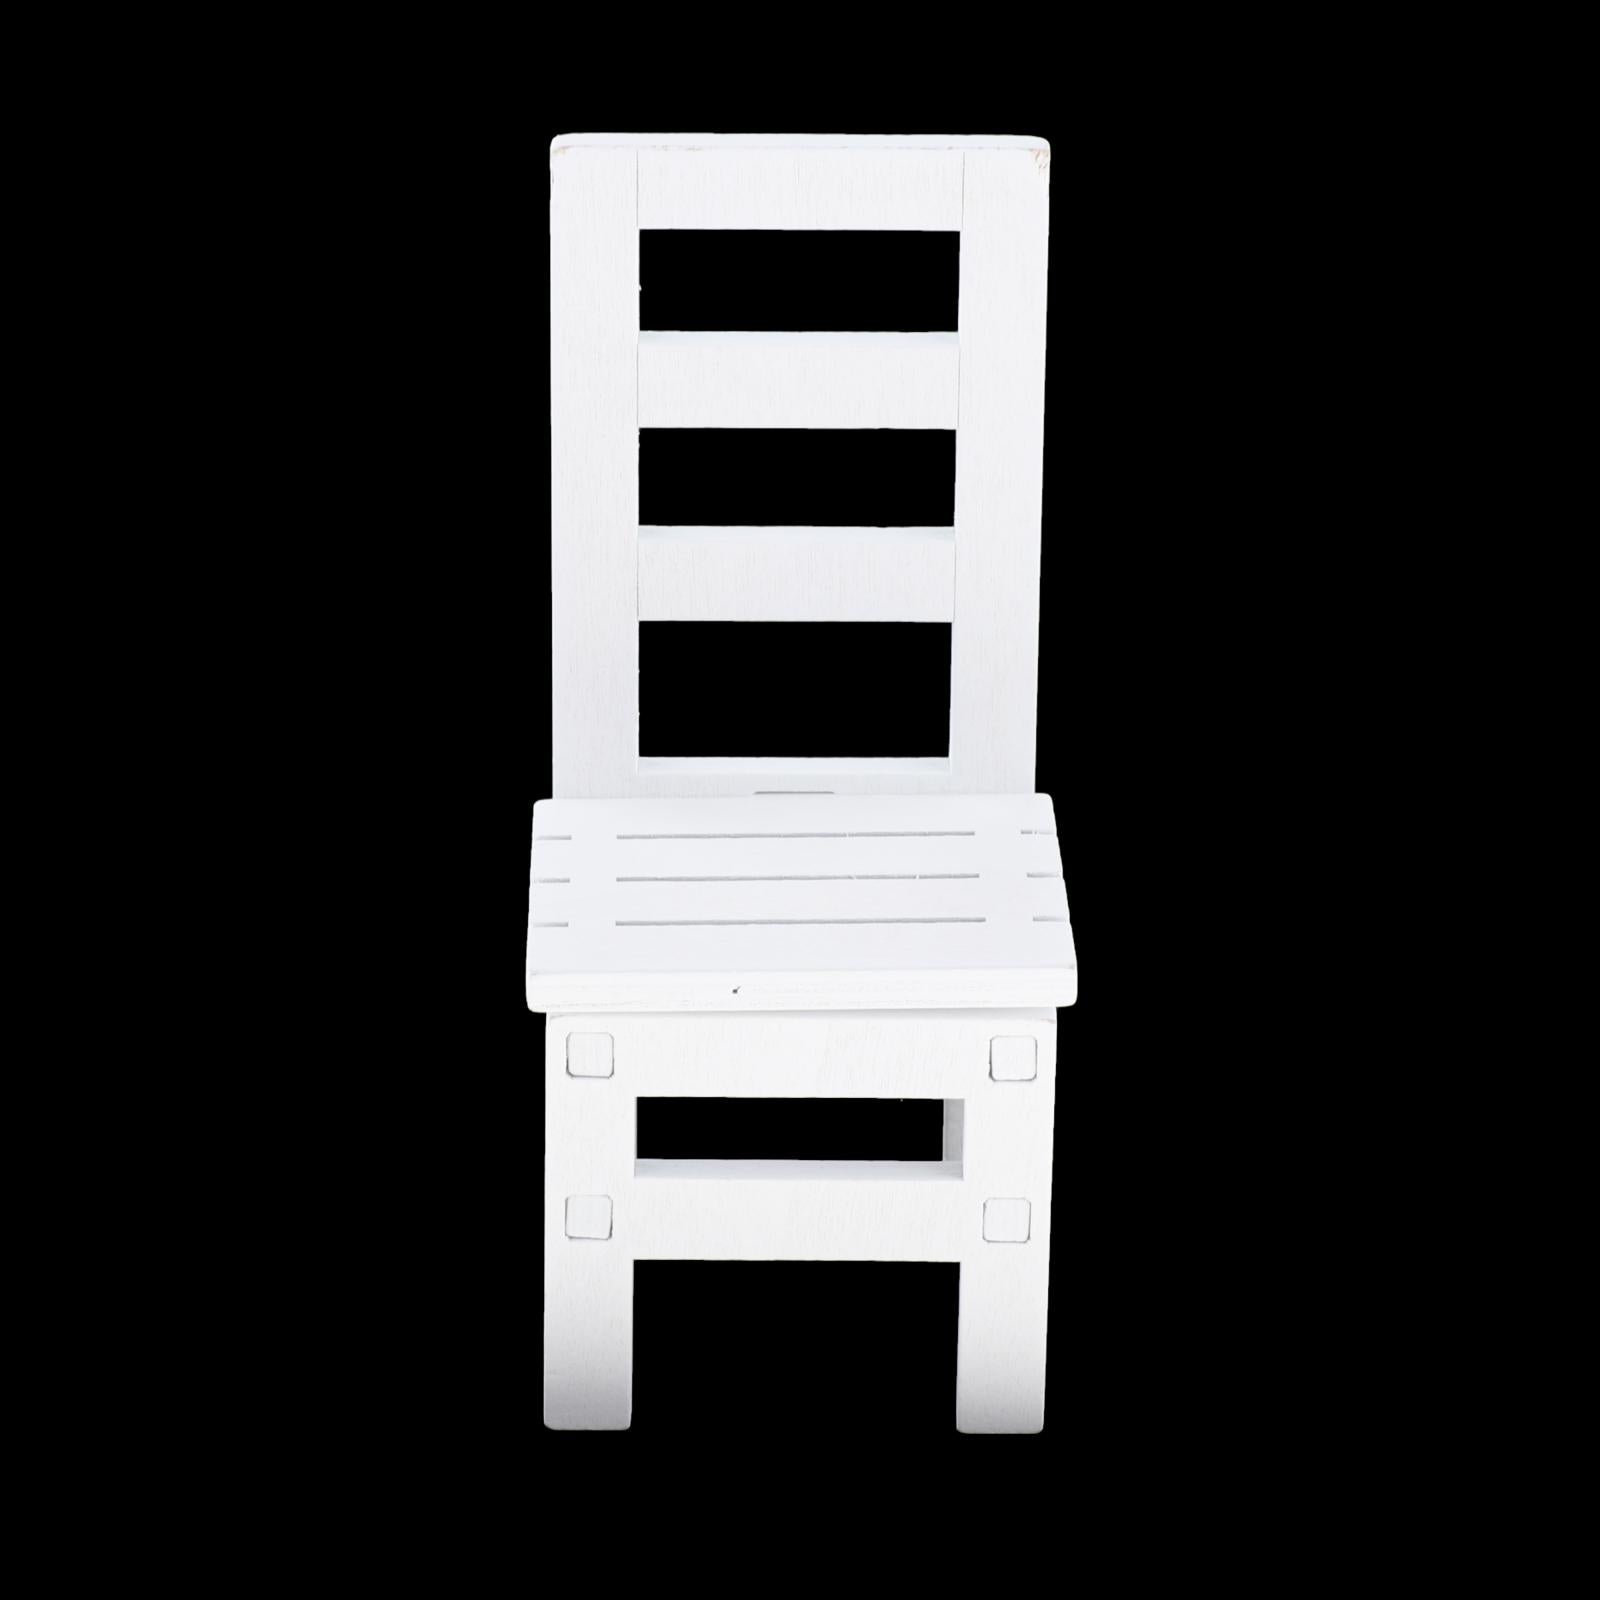 1/6 Scale Furniture for 12" Action Figures Miniature Furniture Chair White